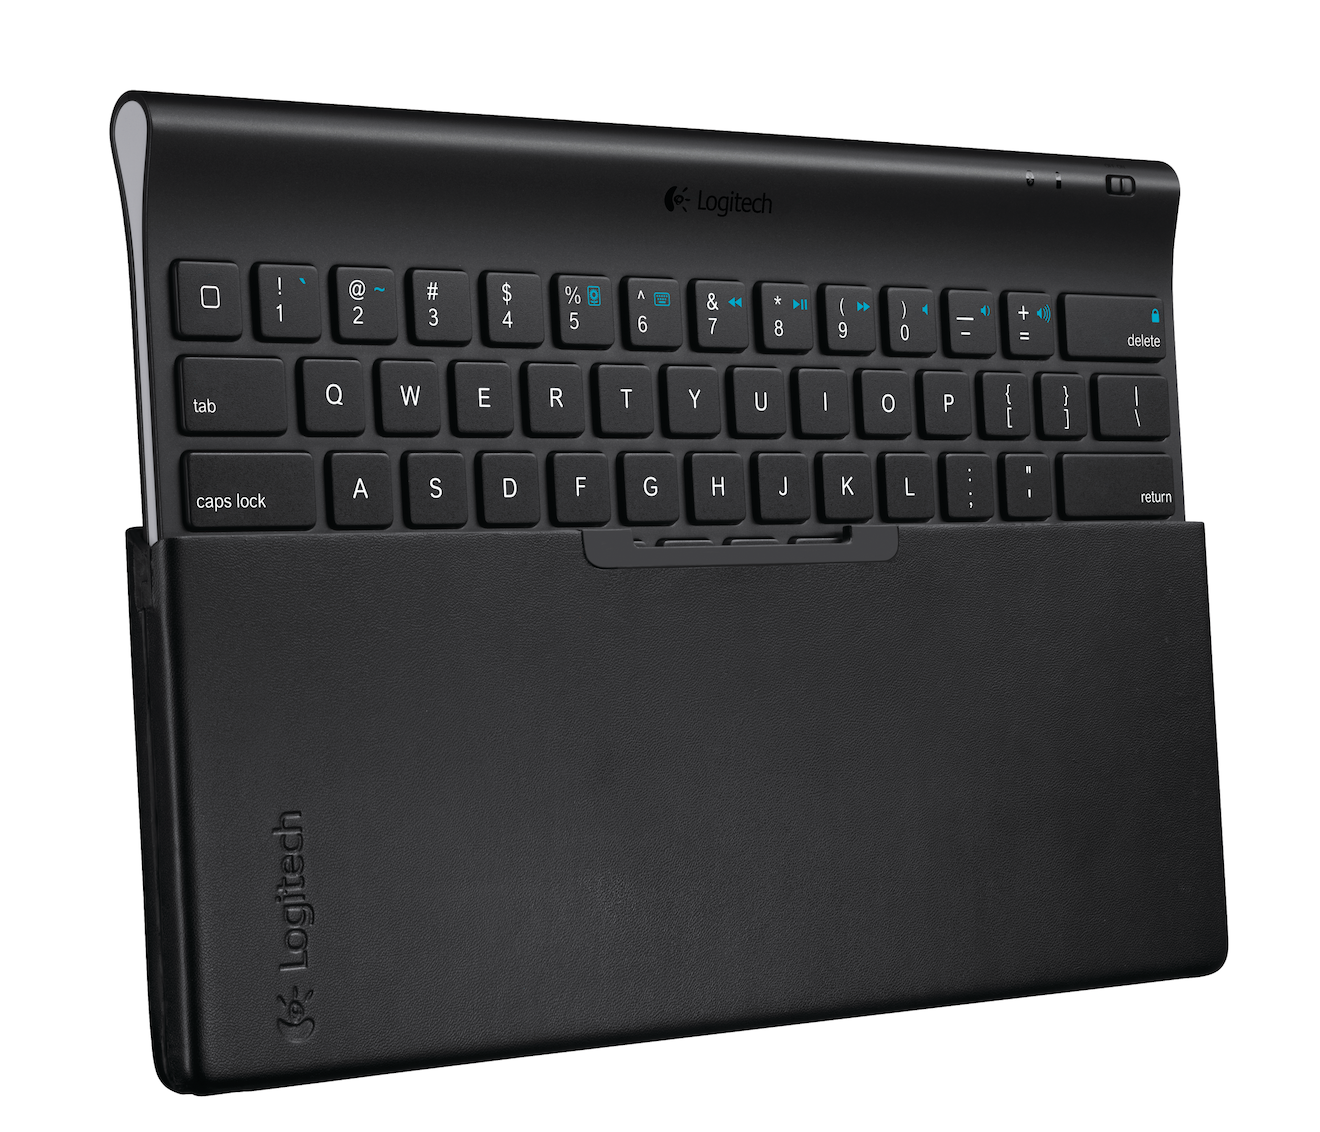 Logitech Tablet Keyboard coming out of its carrying case